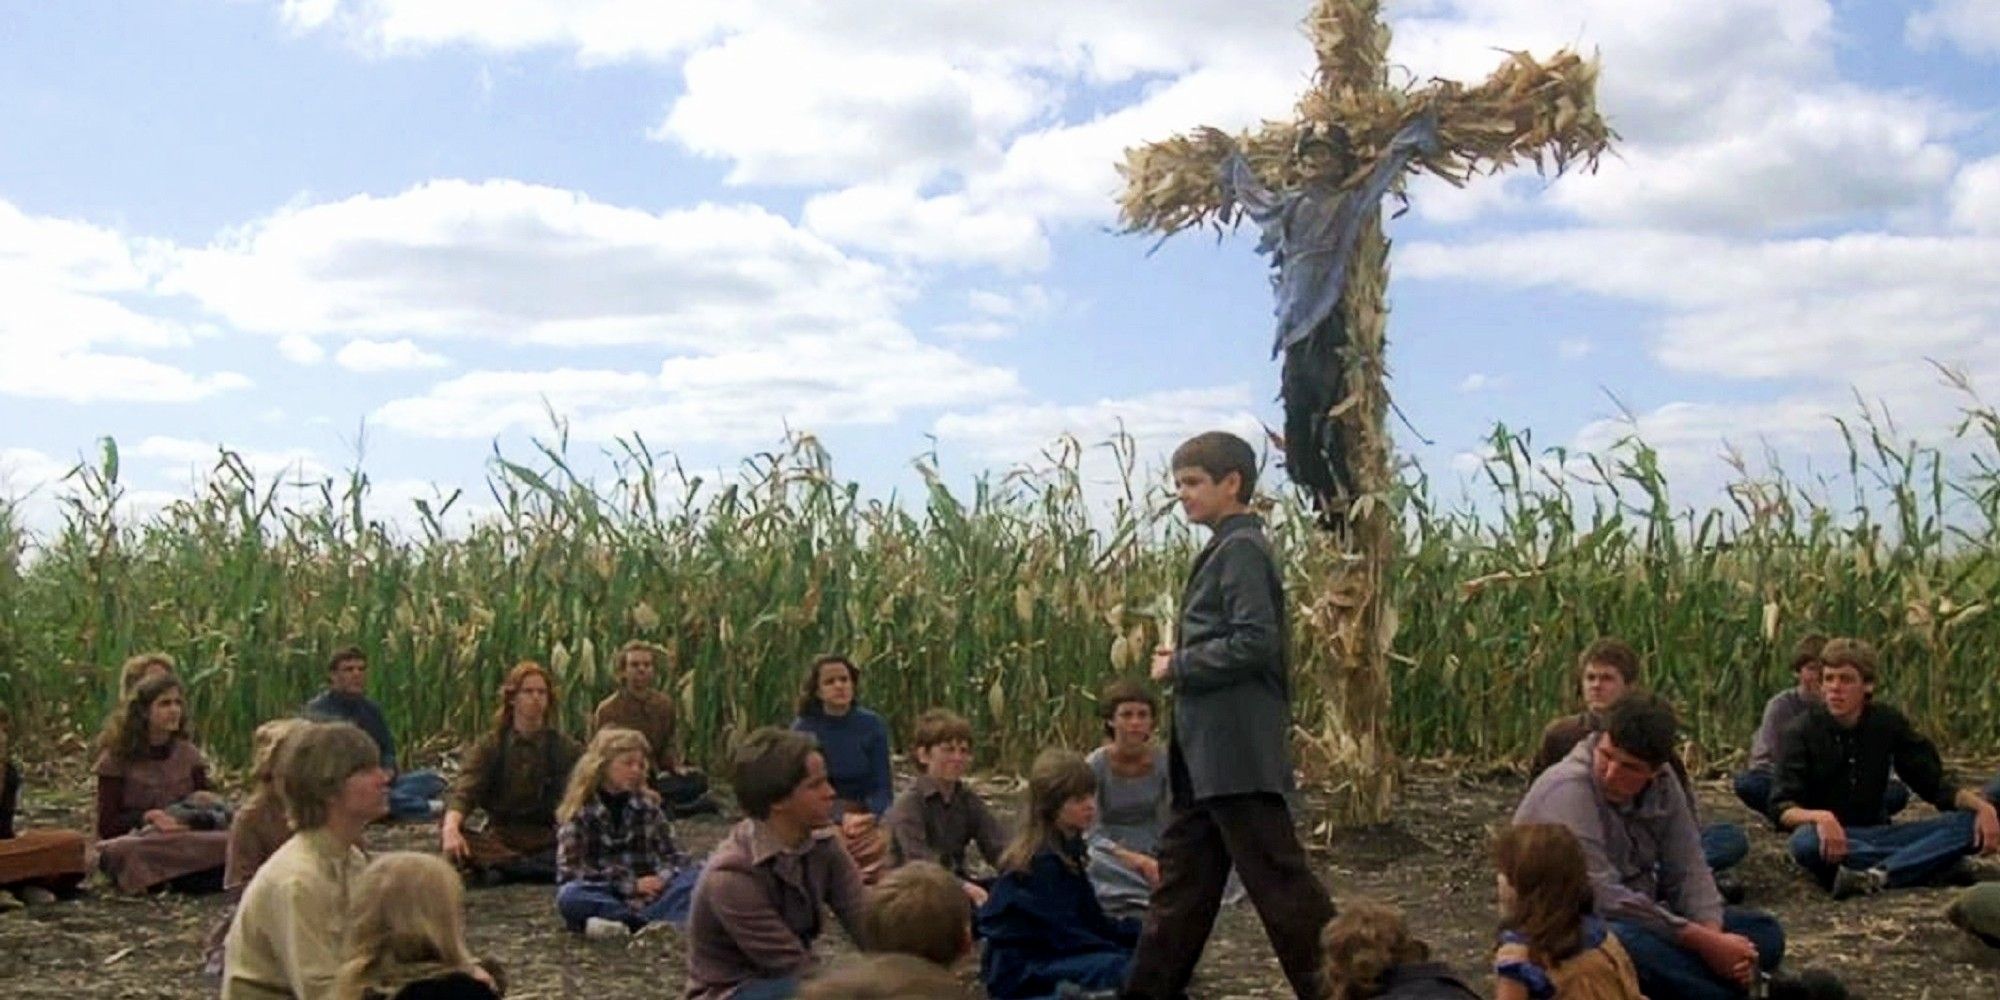 A group of children gathering in a cornfield